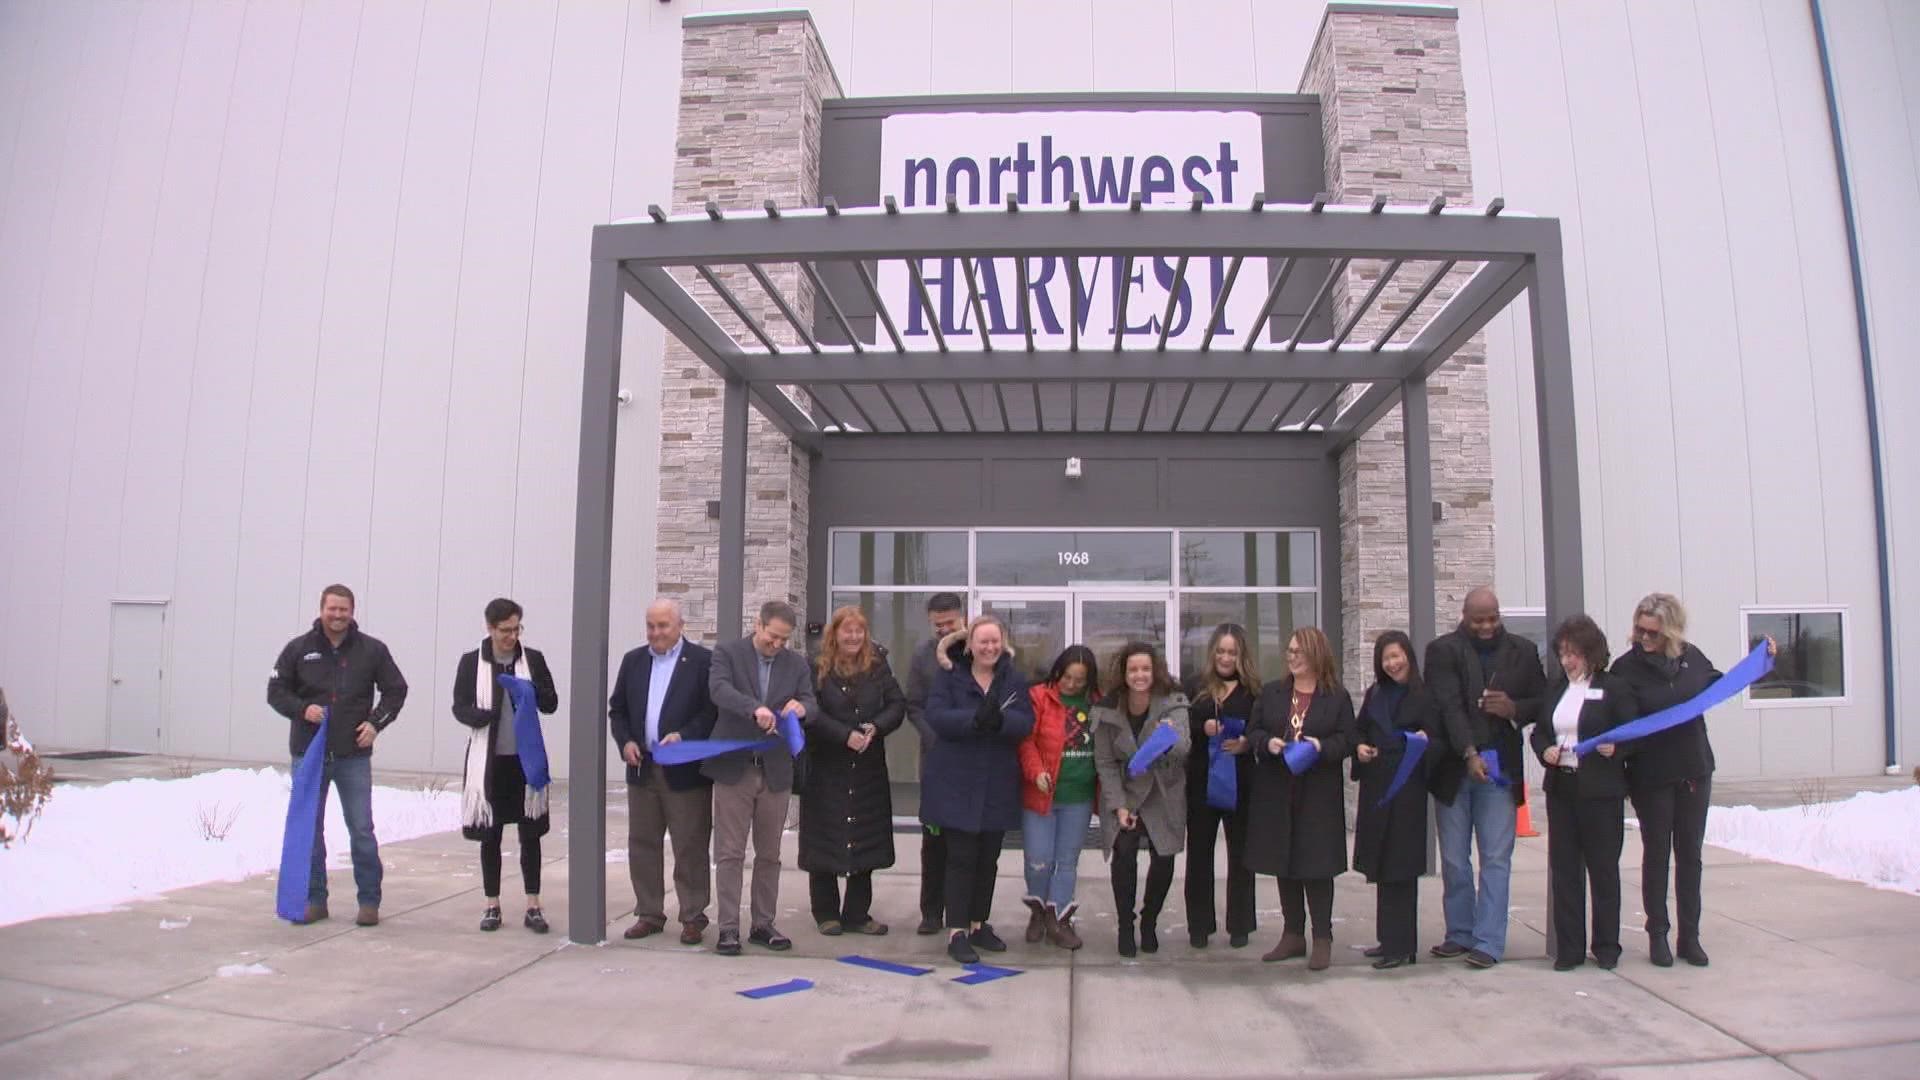 The new statewide distribution center is 200,000 square feet and quadruples the amount of refrigerated storage space Northwest Harvest has available.